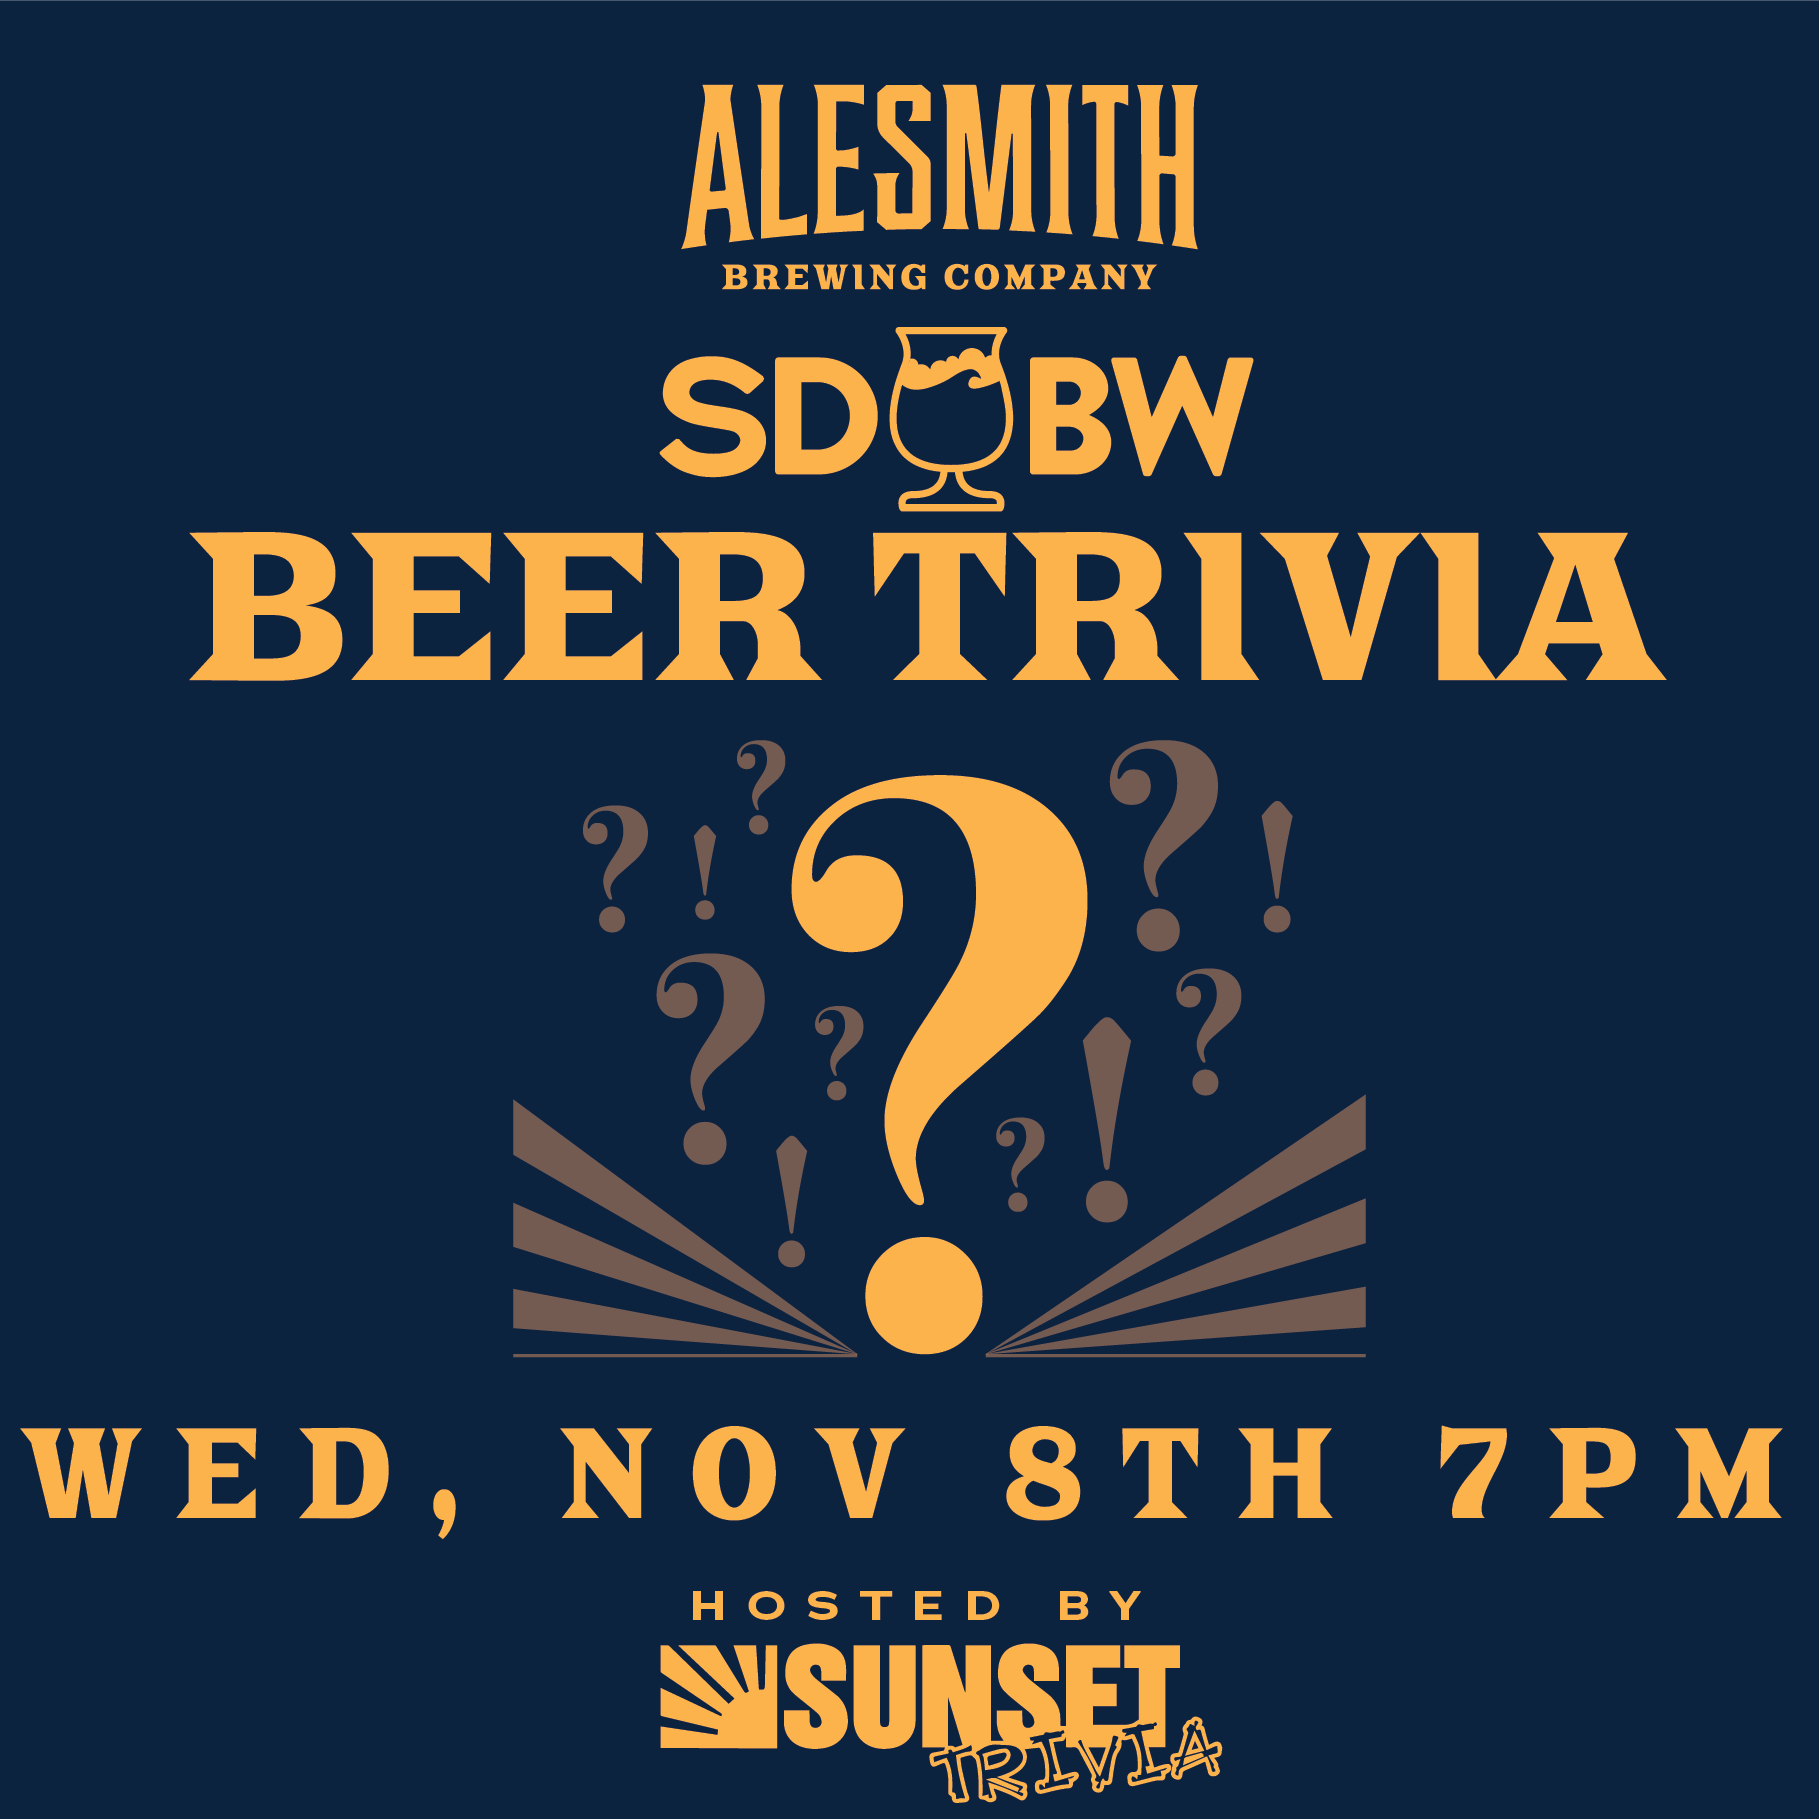 https://alesmith.com/wp-content/uploads/2023/10/AleSmith-Beer-Trivia-Night-Graphic-SDBW-2023.png